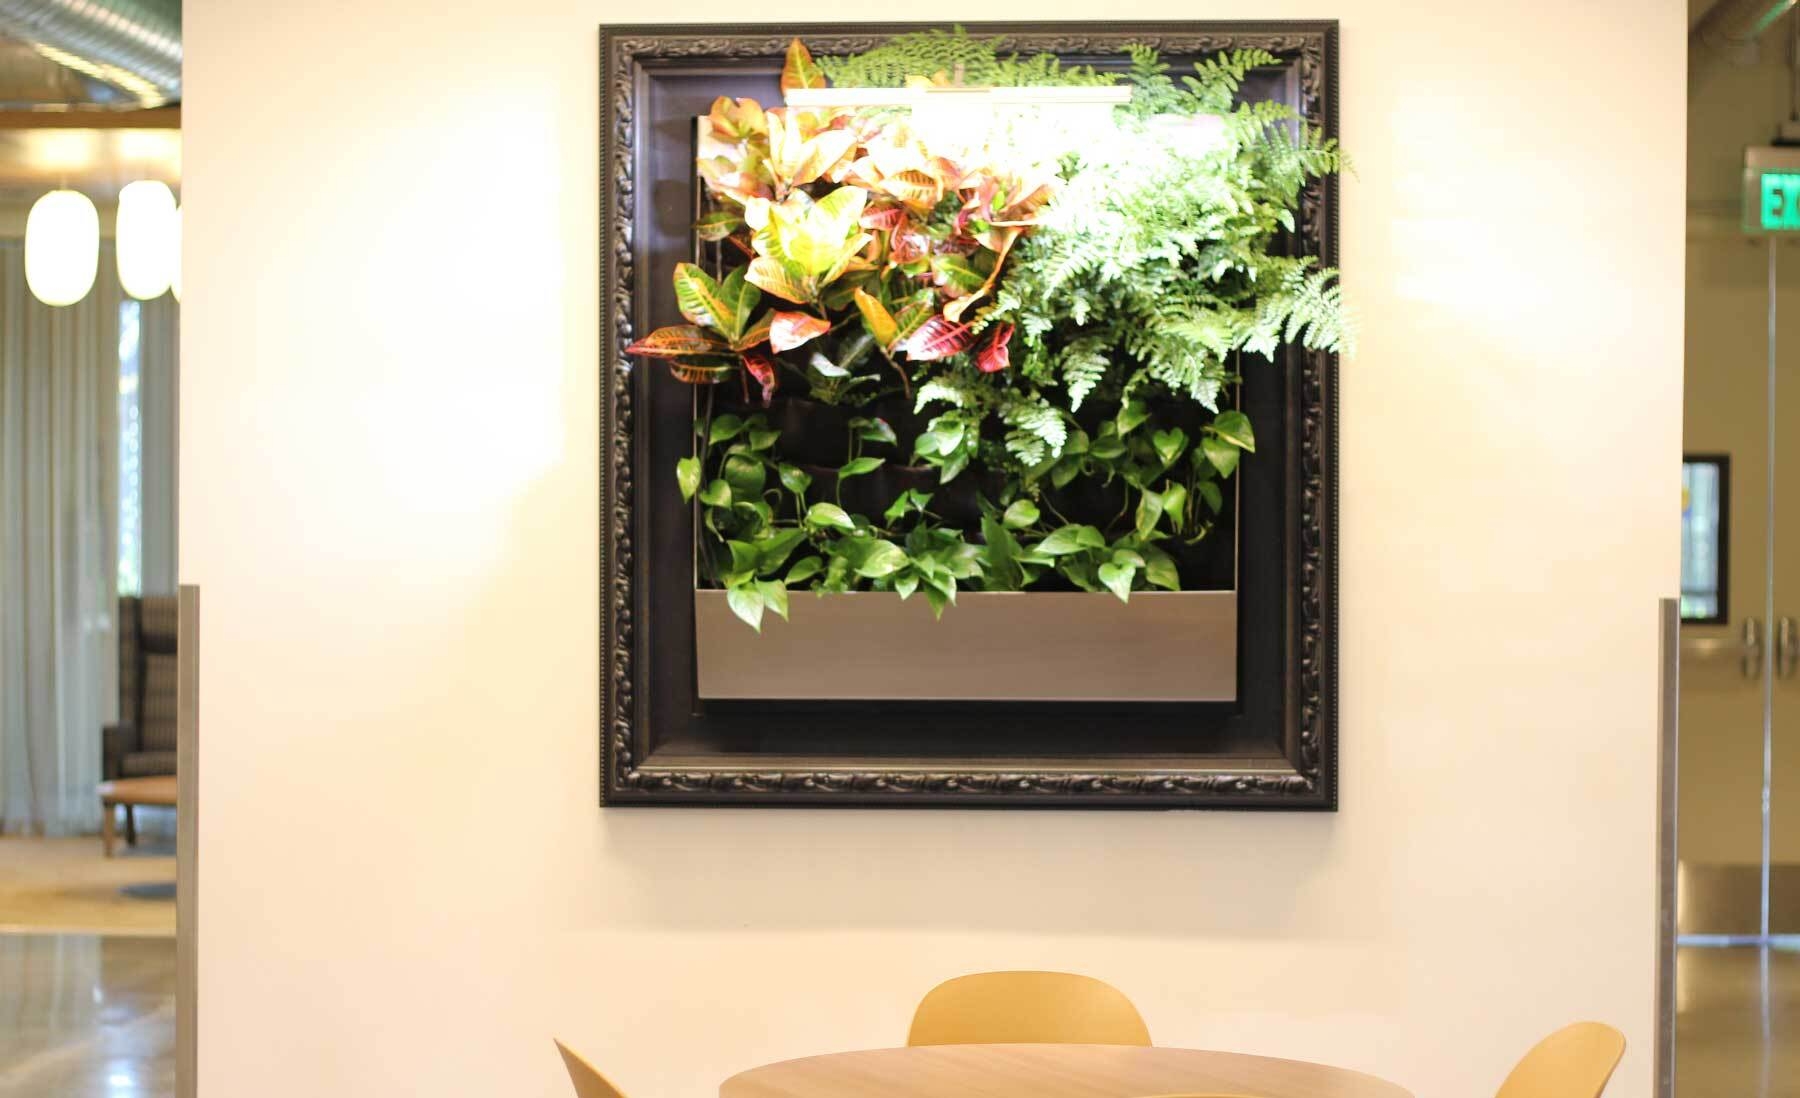 An image of wall art with plants on it